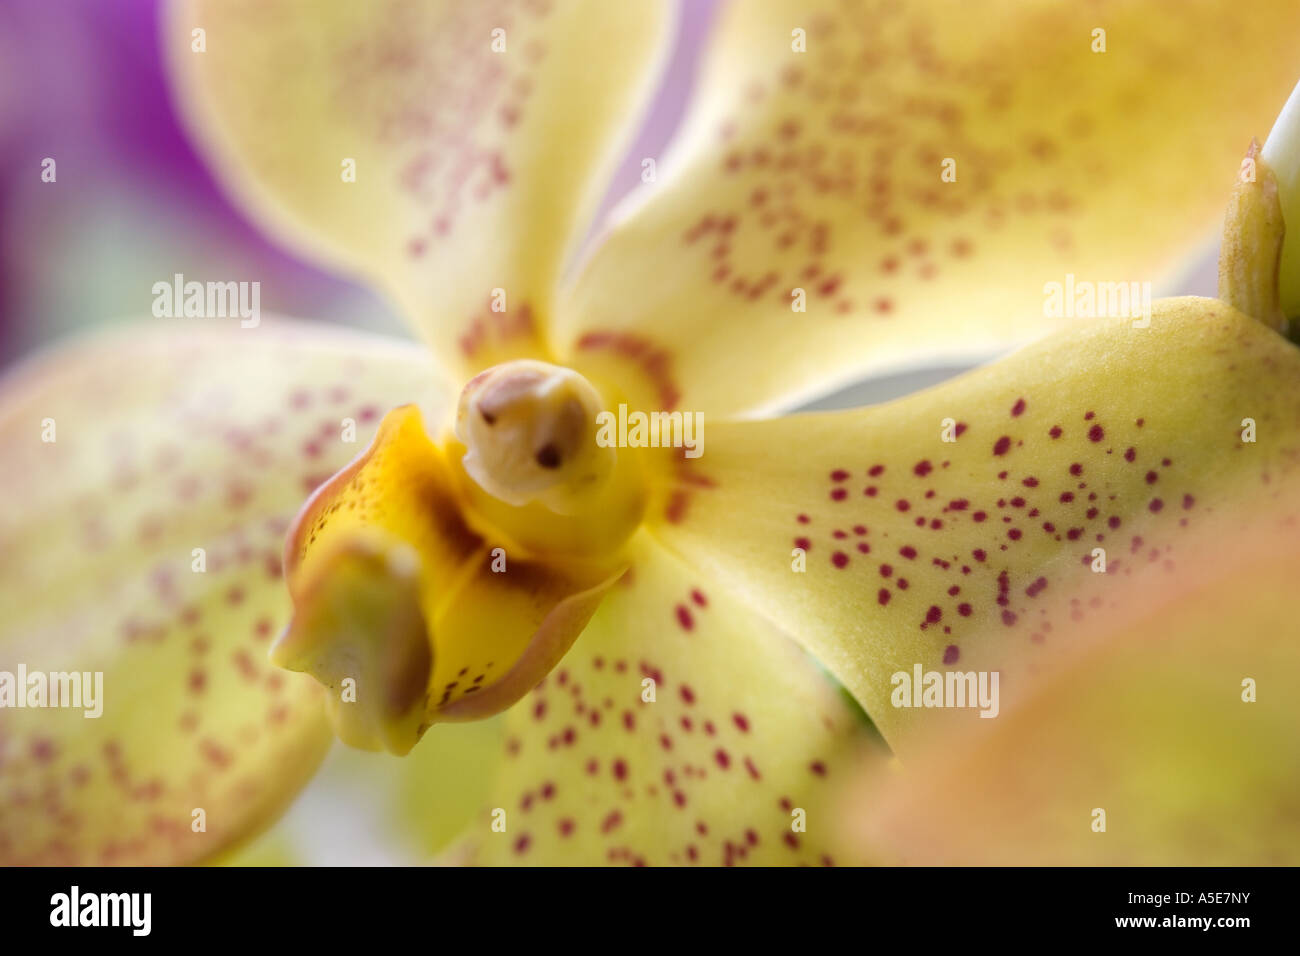 Dendrobium Orchid Flower Stock Photo